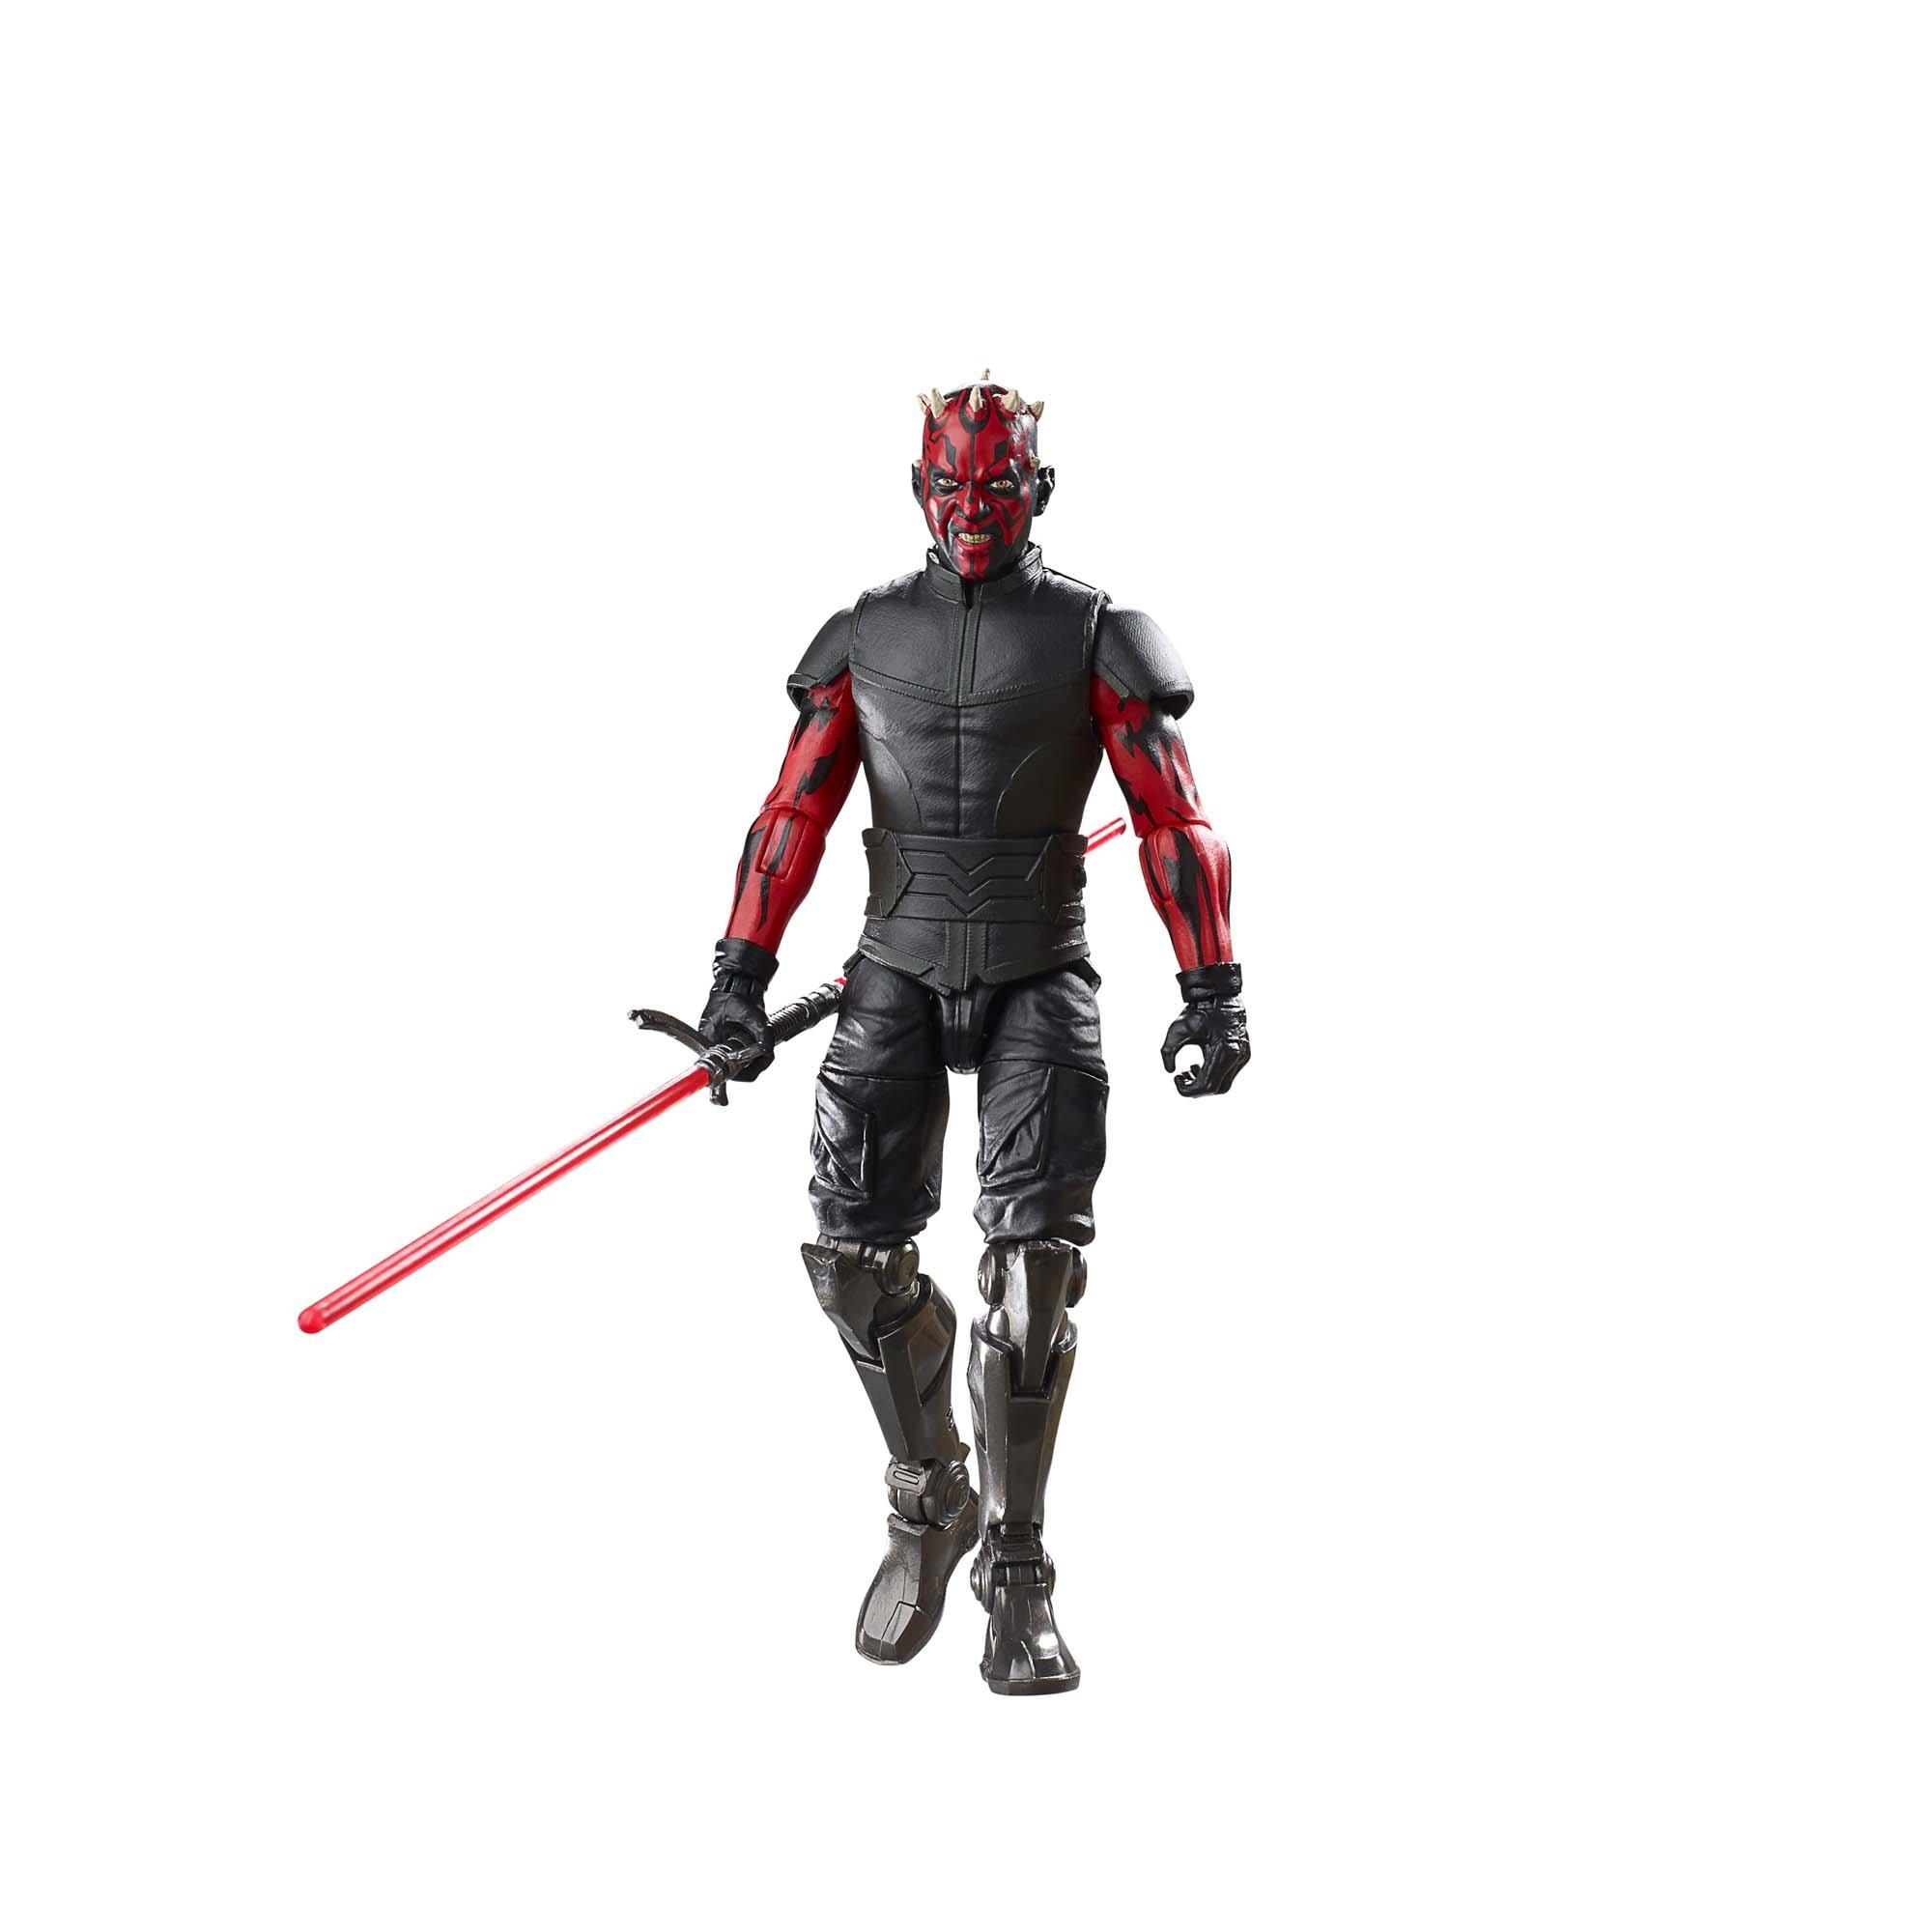 Hasbro Star Wars: The Black Series Gaming Greats Star Wars: Battlefront II Darth Maul (Old Master) 6-in Action Figure GameStop Exclusive